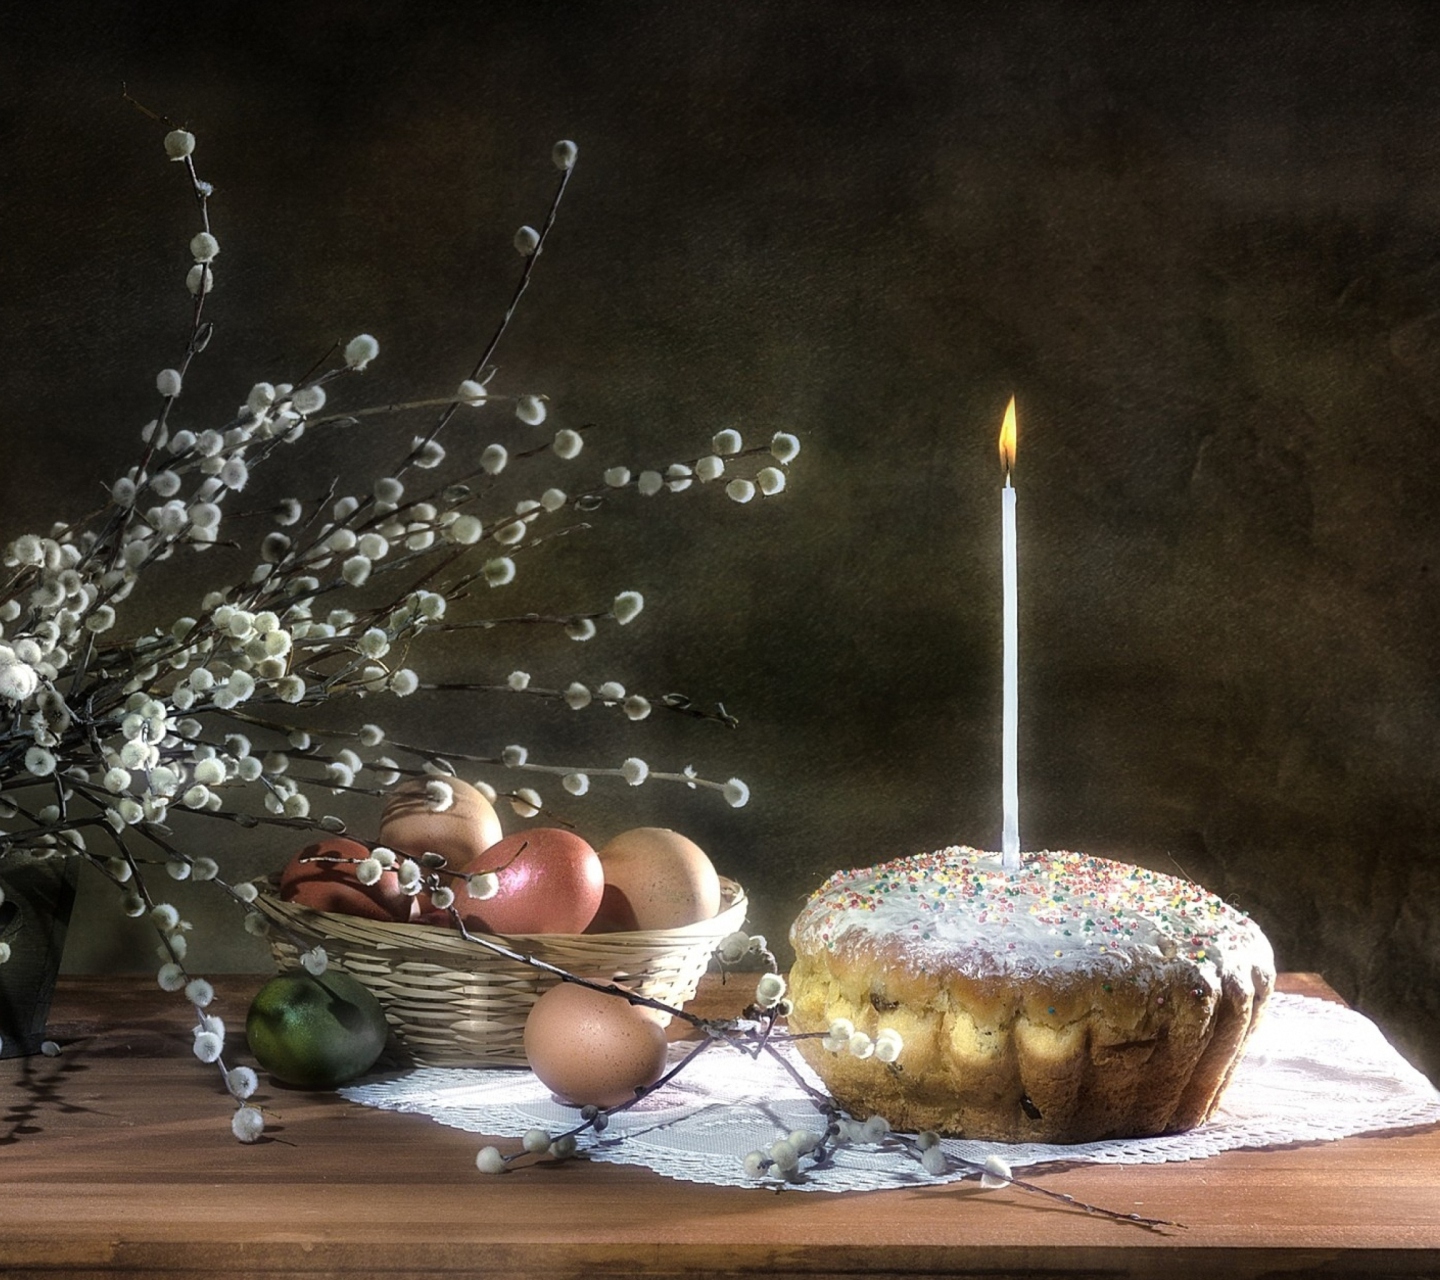 Das Easter Cake With Candle Wallpaper 1440x1280